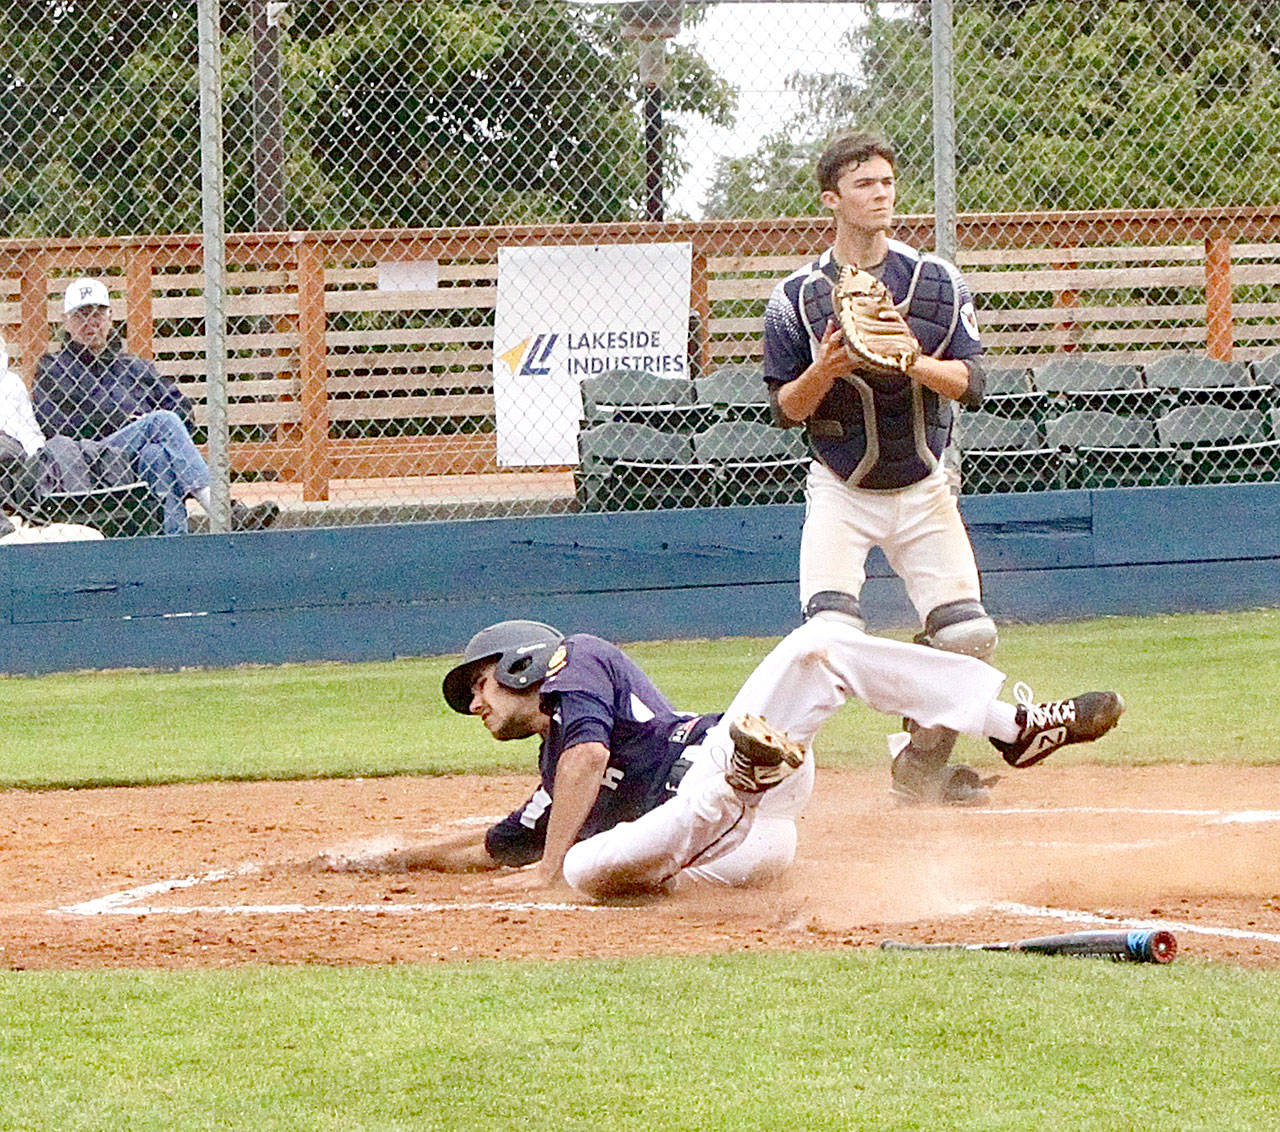 Wilder Senior’s Gavin Guerrero slides safely home for a run against Snohomish on Saturday. Wilder swept two games 11-3 and 13-1 as Guerrero had five hits and four runs scored on the day. (Dave Logan/for Peninsula Daily News)